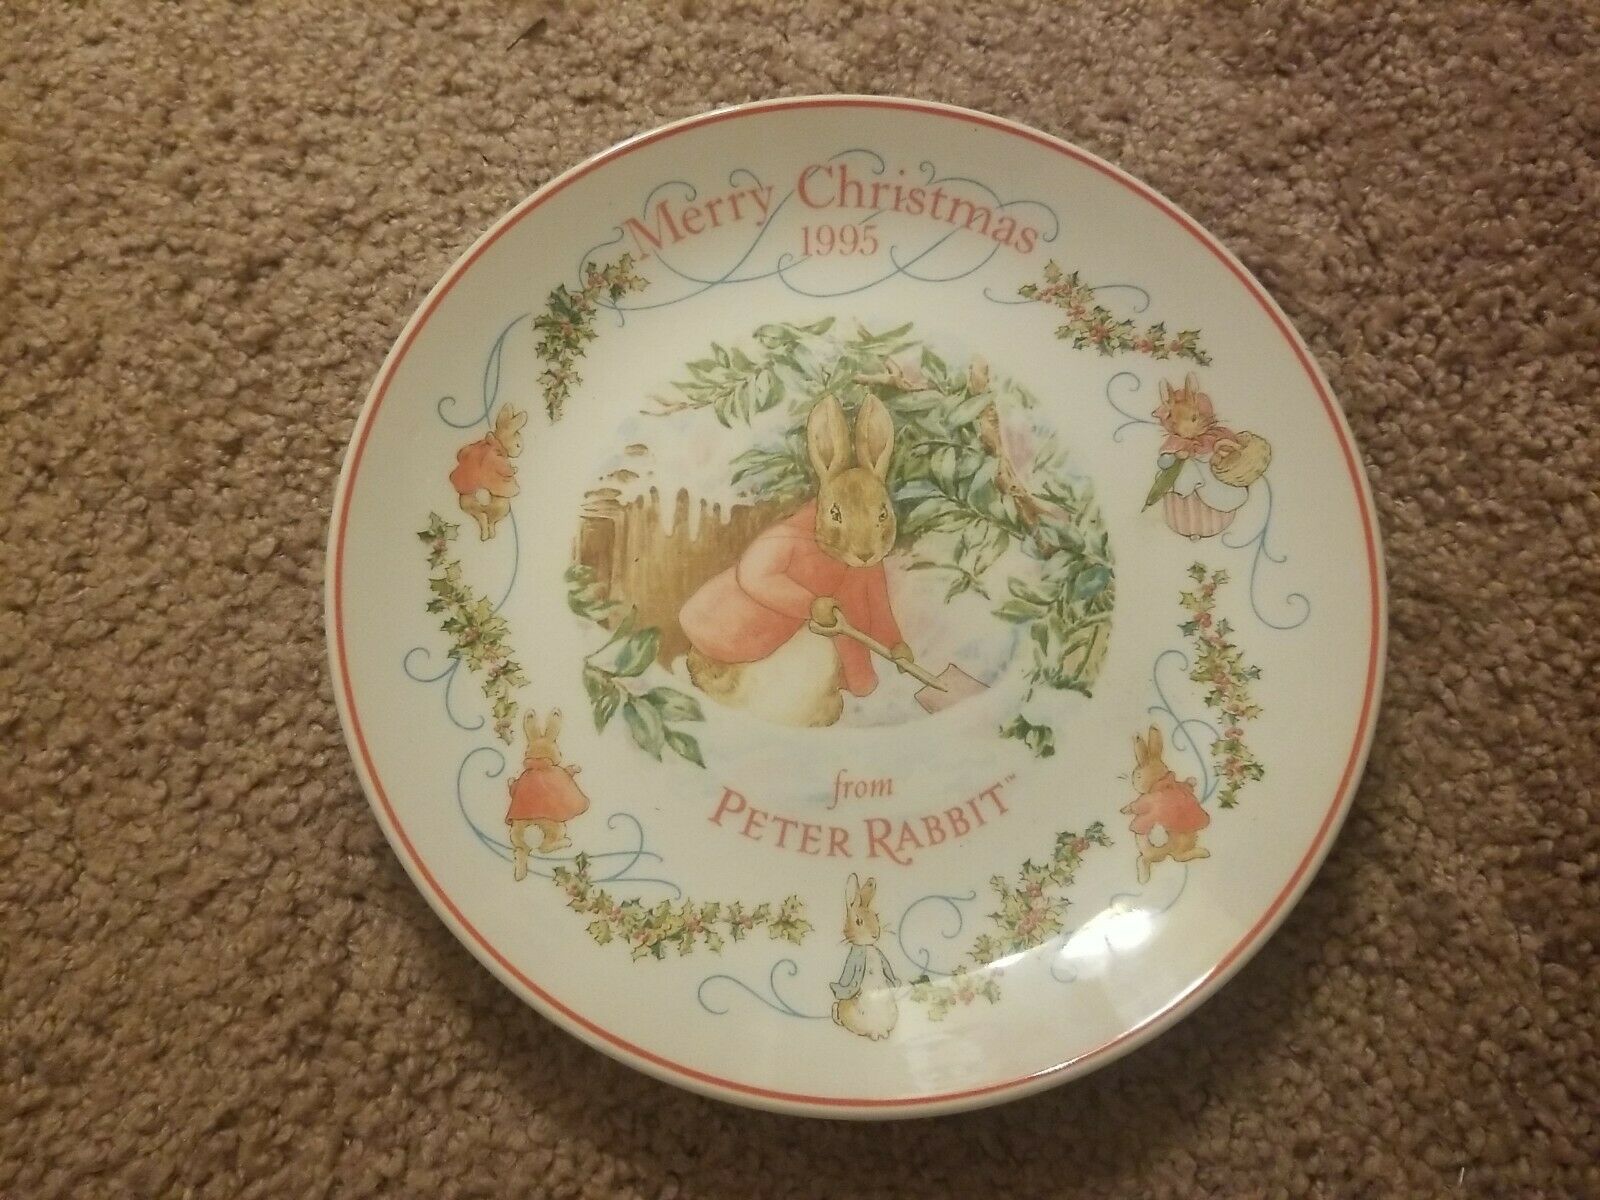 Peter Rabbit Branded Collectible Plate. Merry Christmas 1995 Made In England